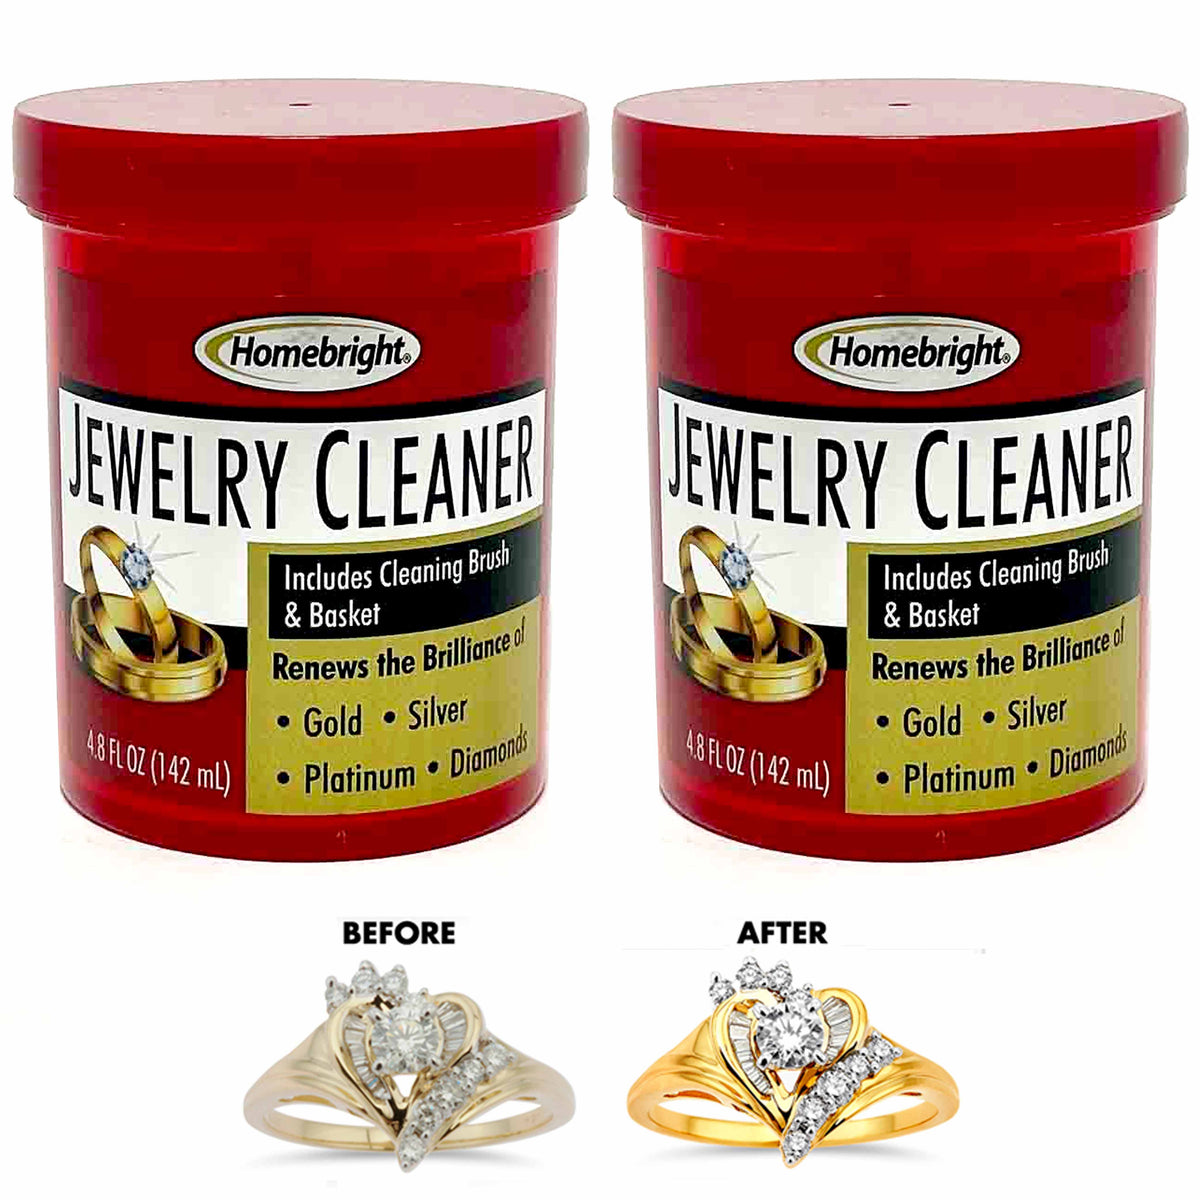 Jewelry Cleaner Solution Safely Clean All Jewelry Gold Silver Diamonds Stones !!